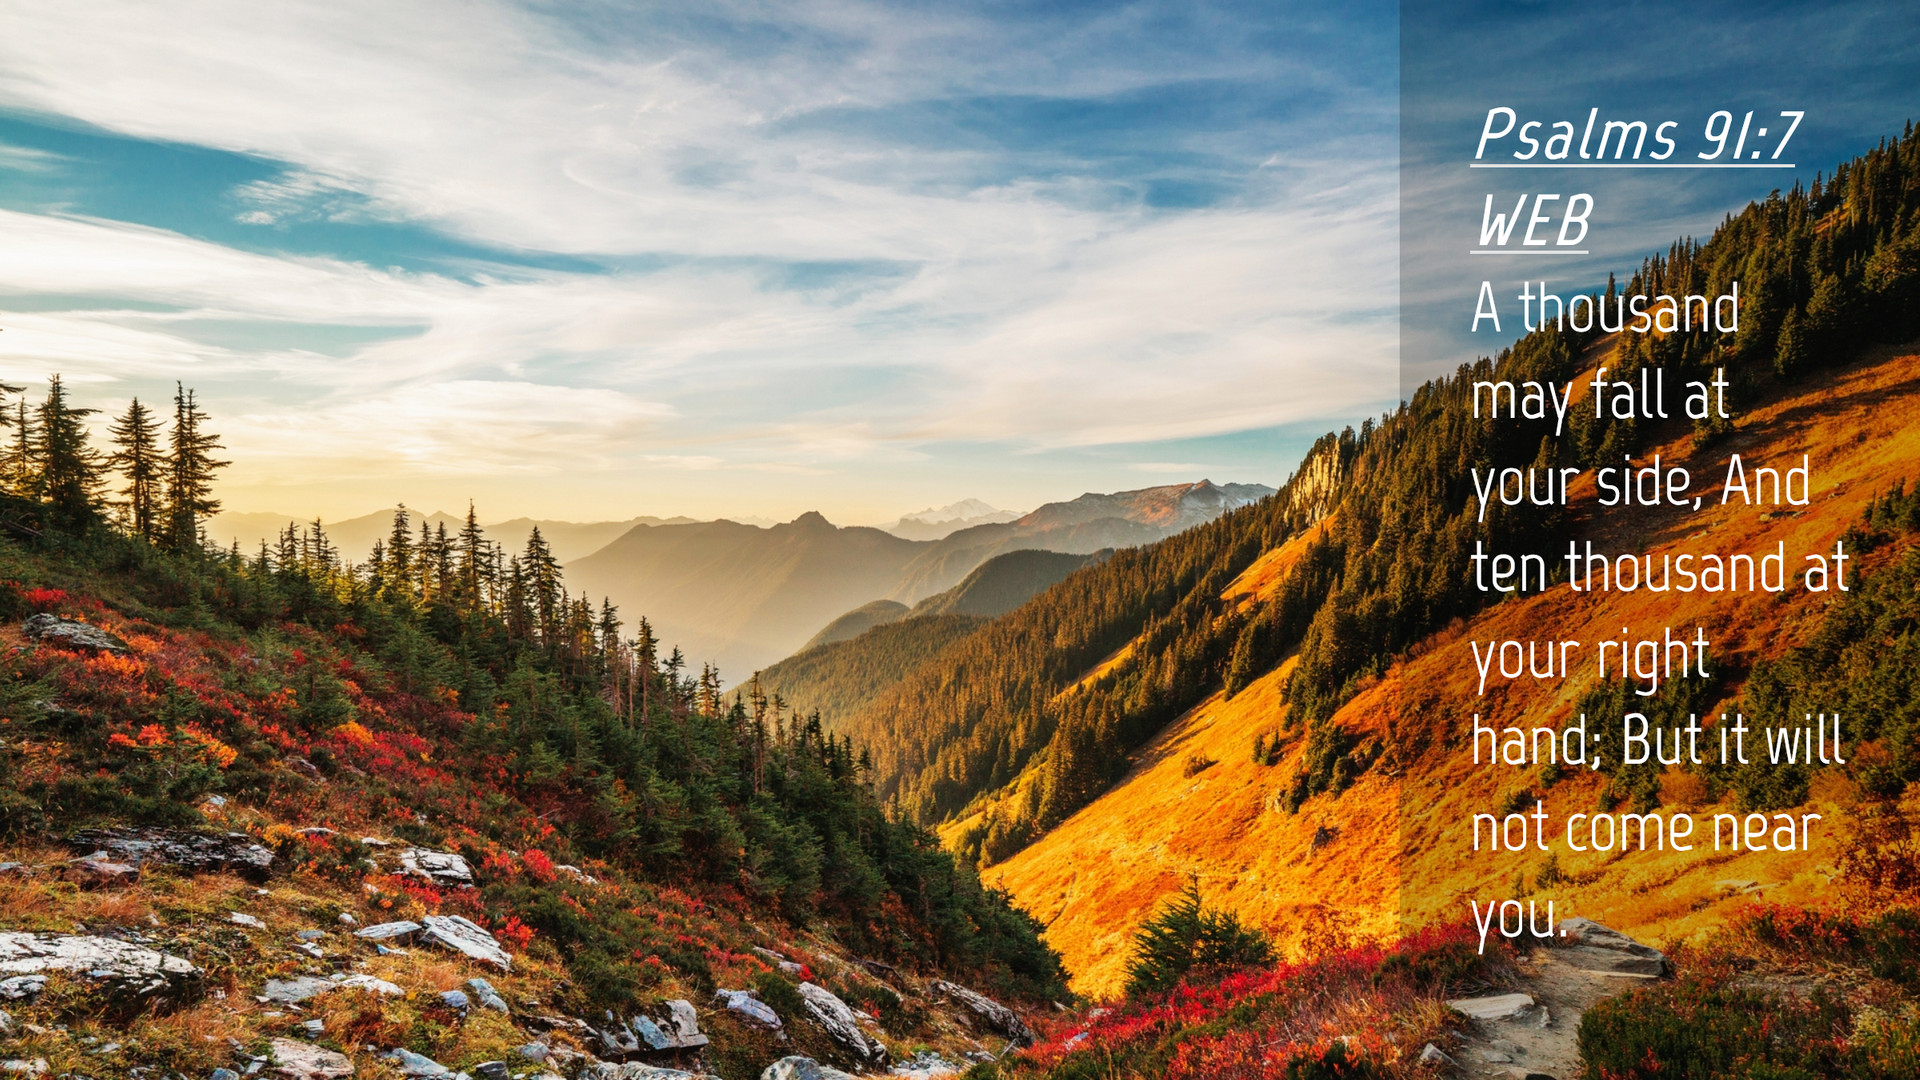 Psalms 91:7 WEB Desktop Wallpaper thousand may fall at your side